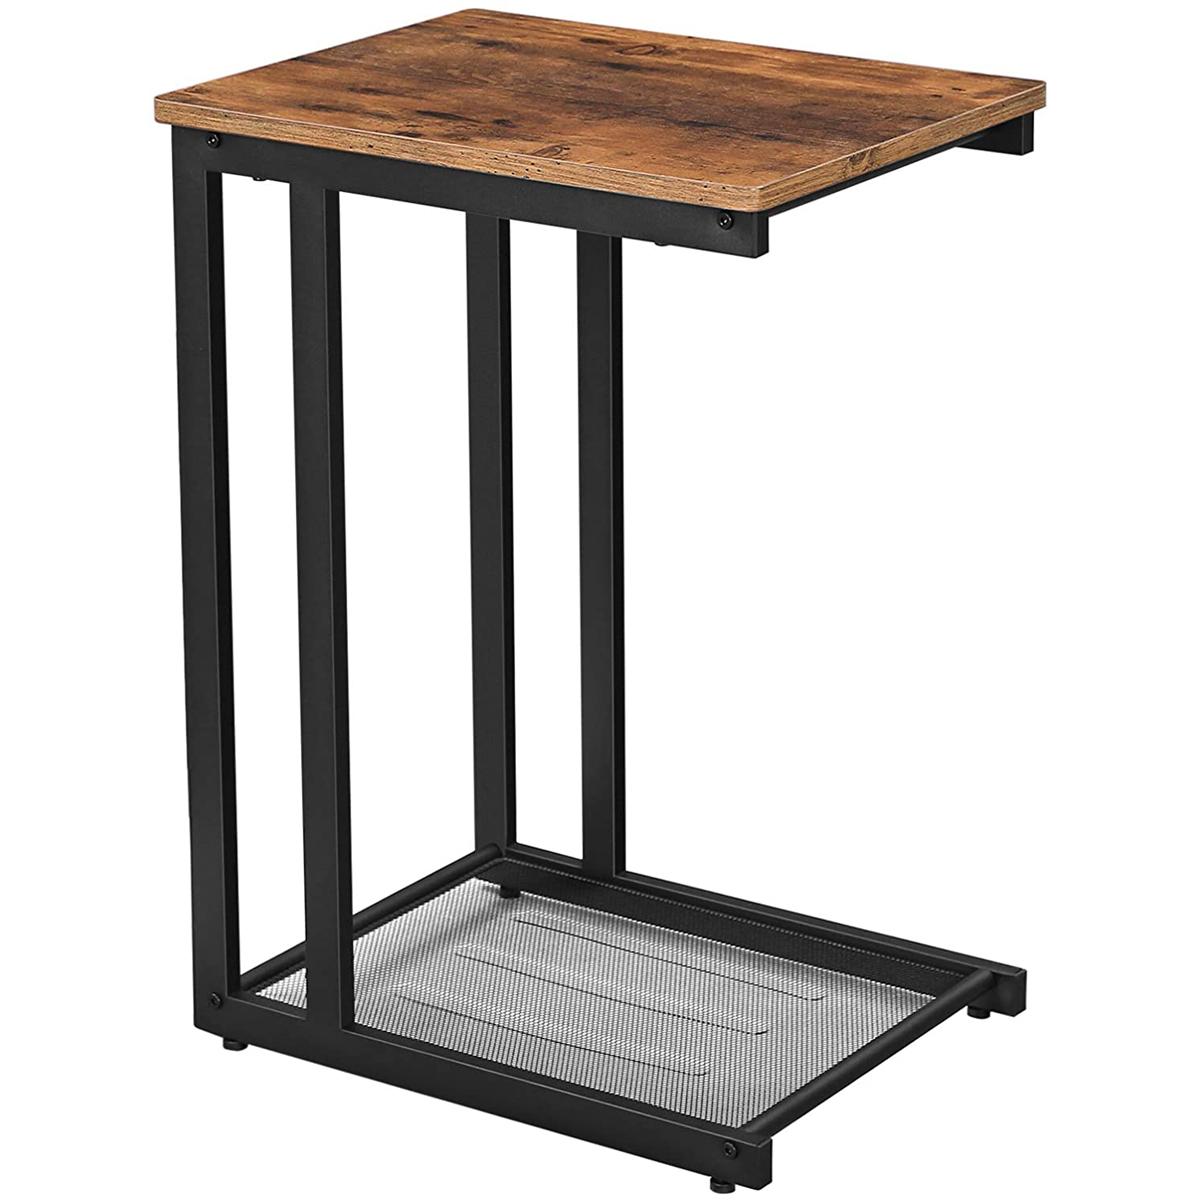 Vasagle Indestic Side Table for $28.49 Shipped